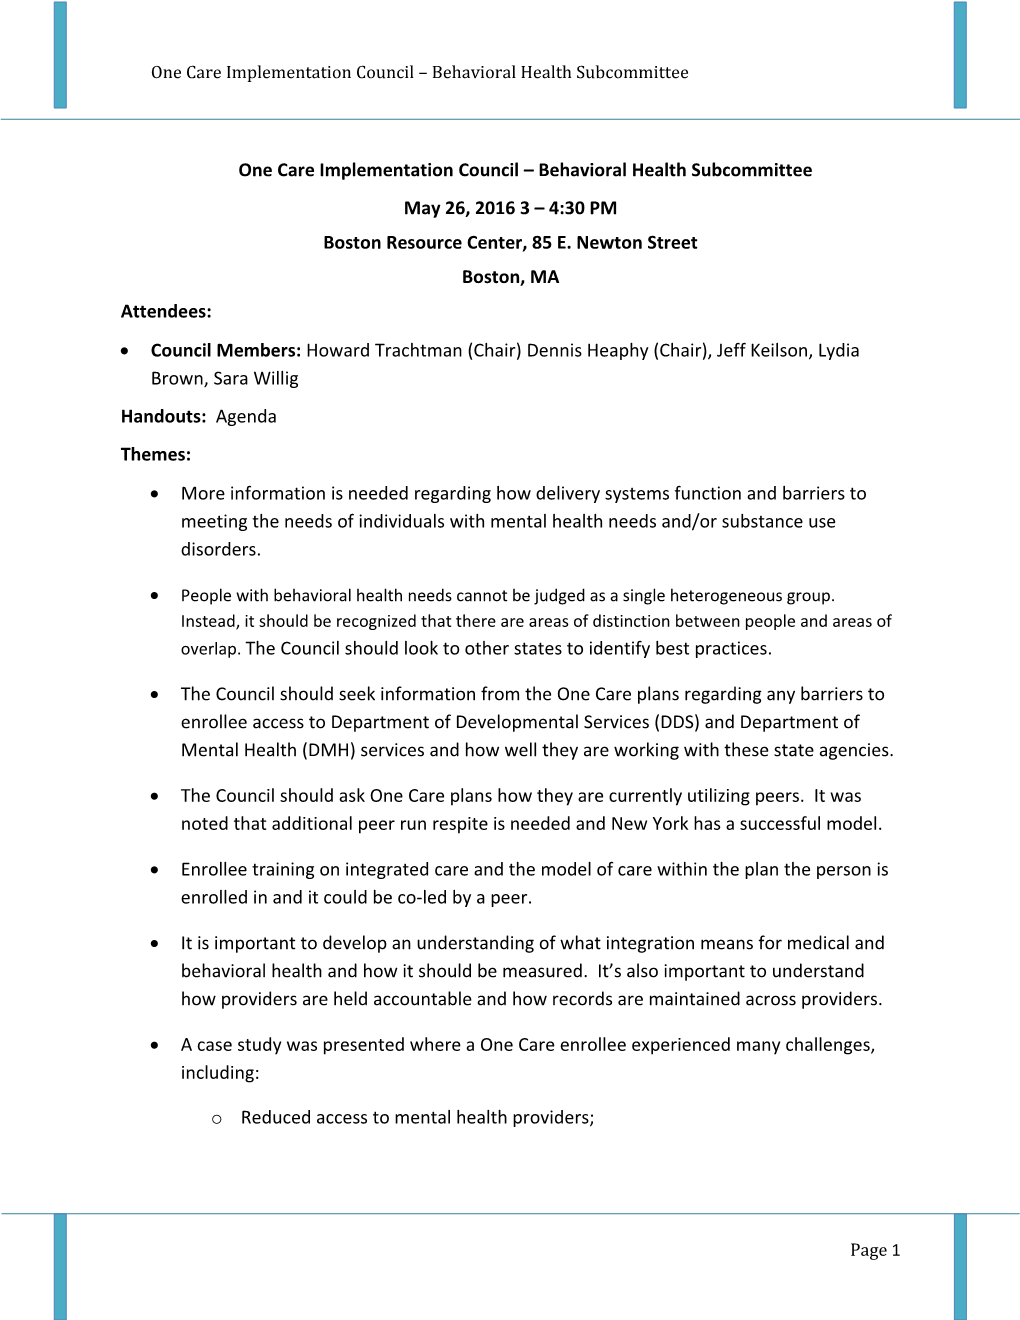 One Care Implementation Council Behavioral Health Subcommittee